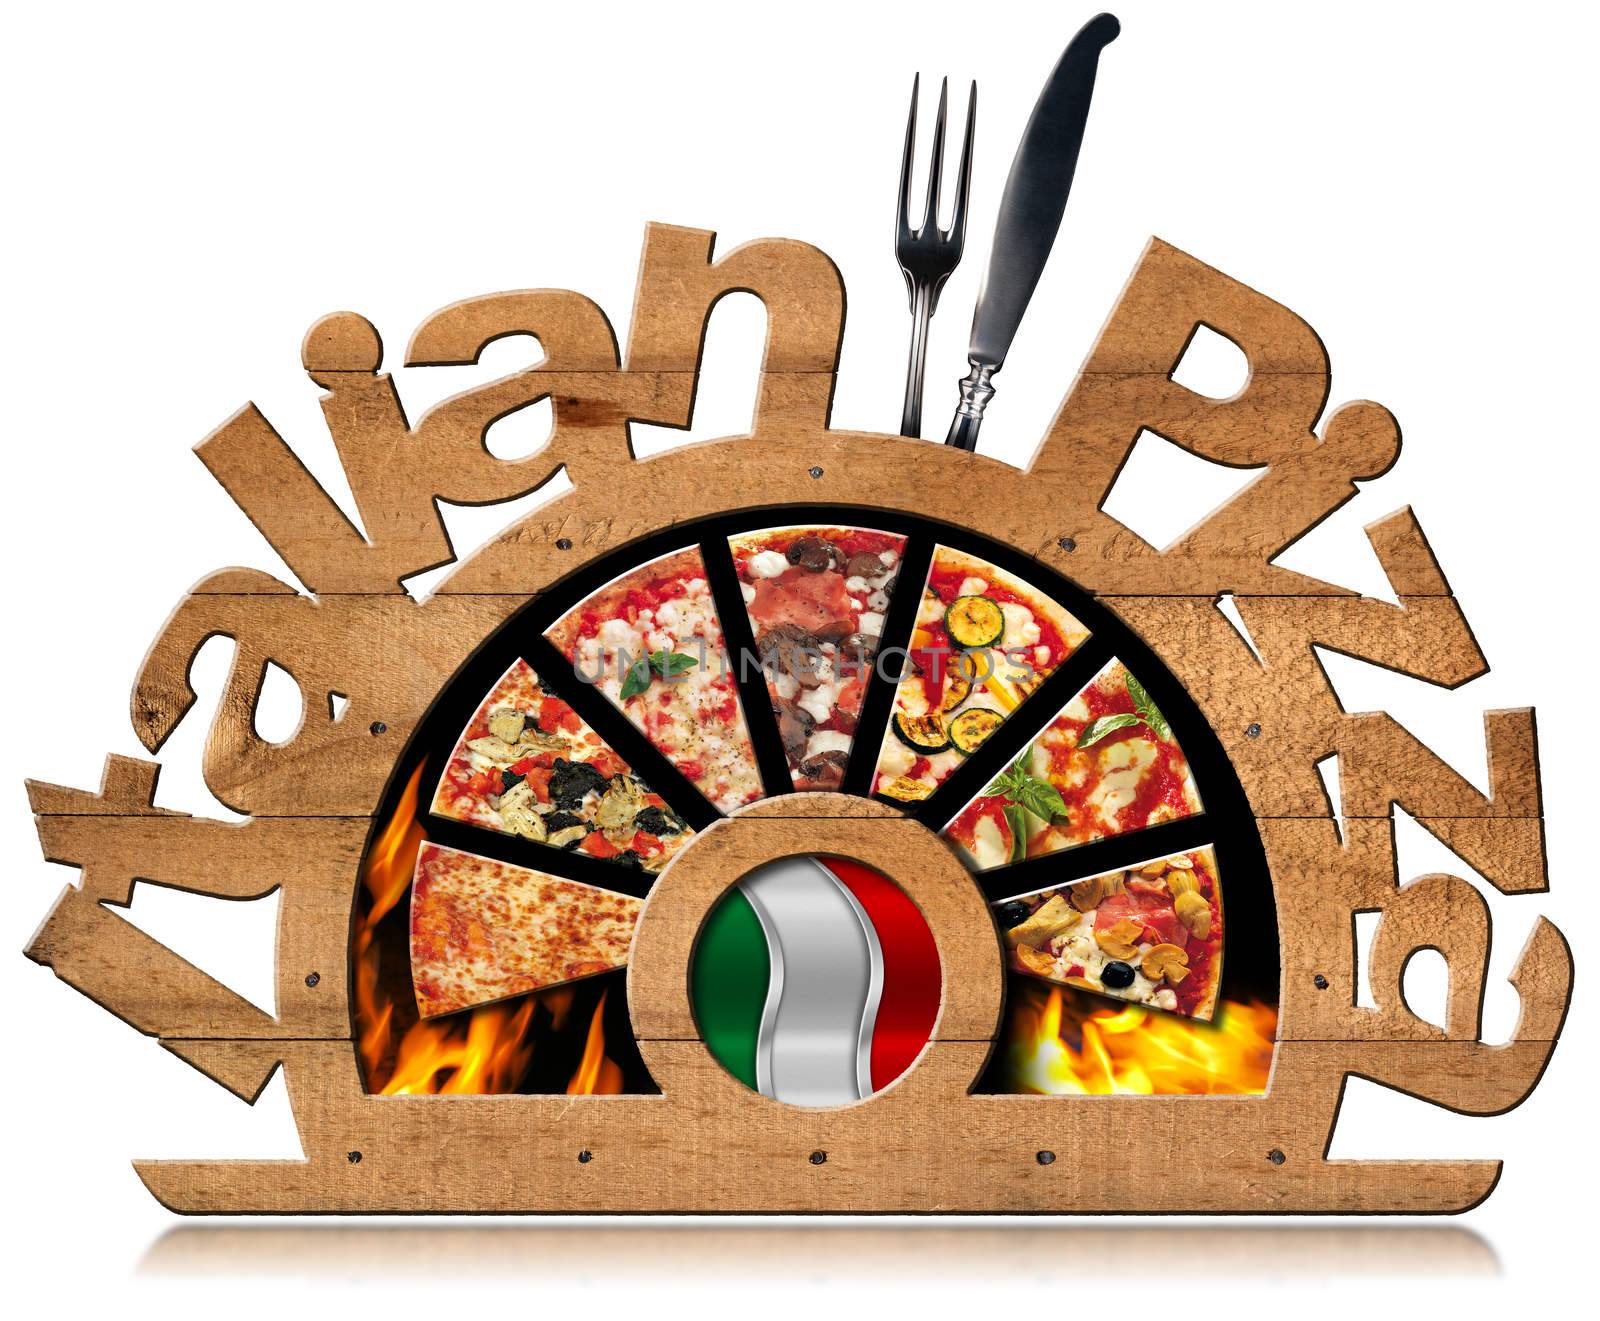 Wooden symbol with pizza slices, flames, text Italian Pizza, silver cutlery and Italian flag. Isolated on white background